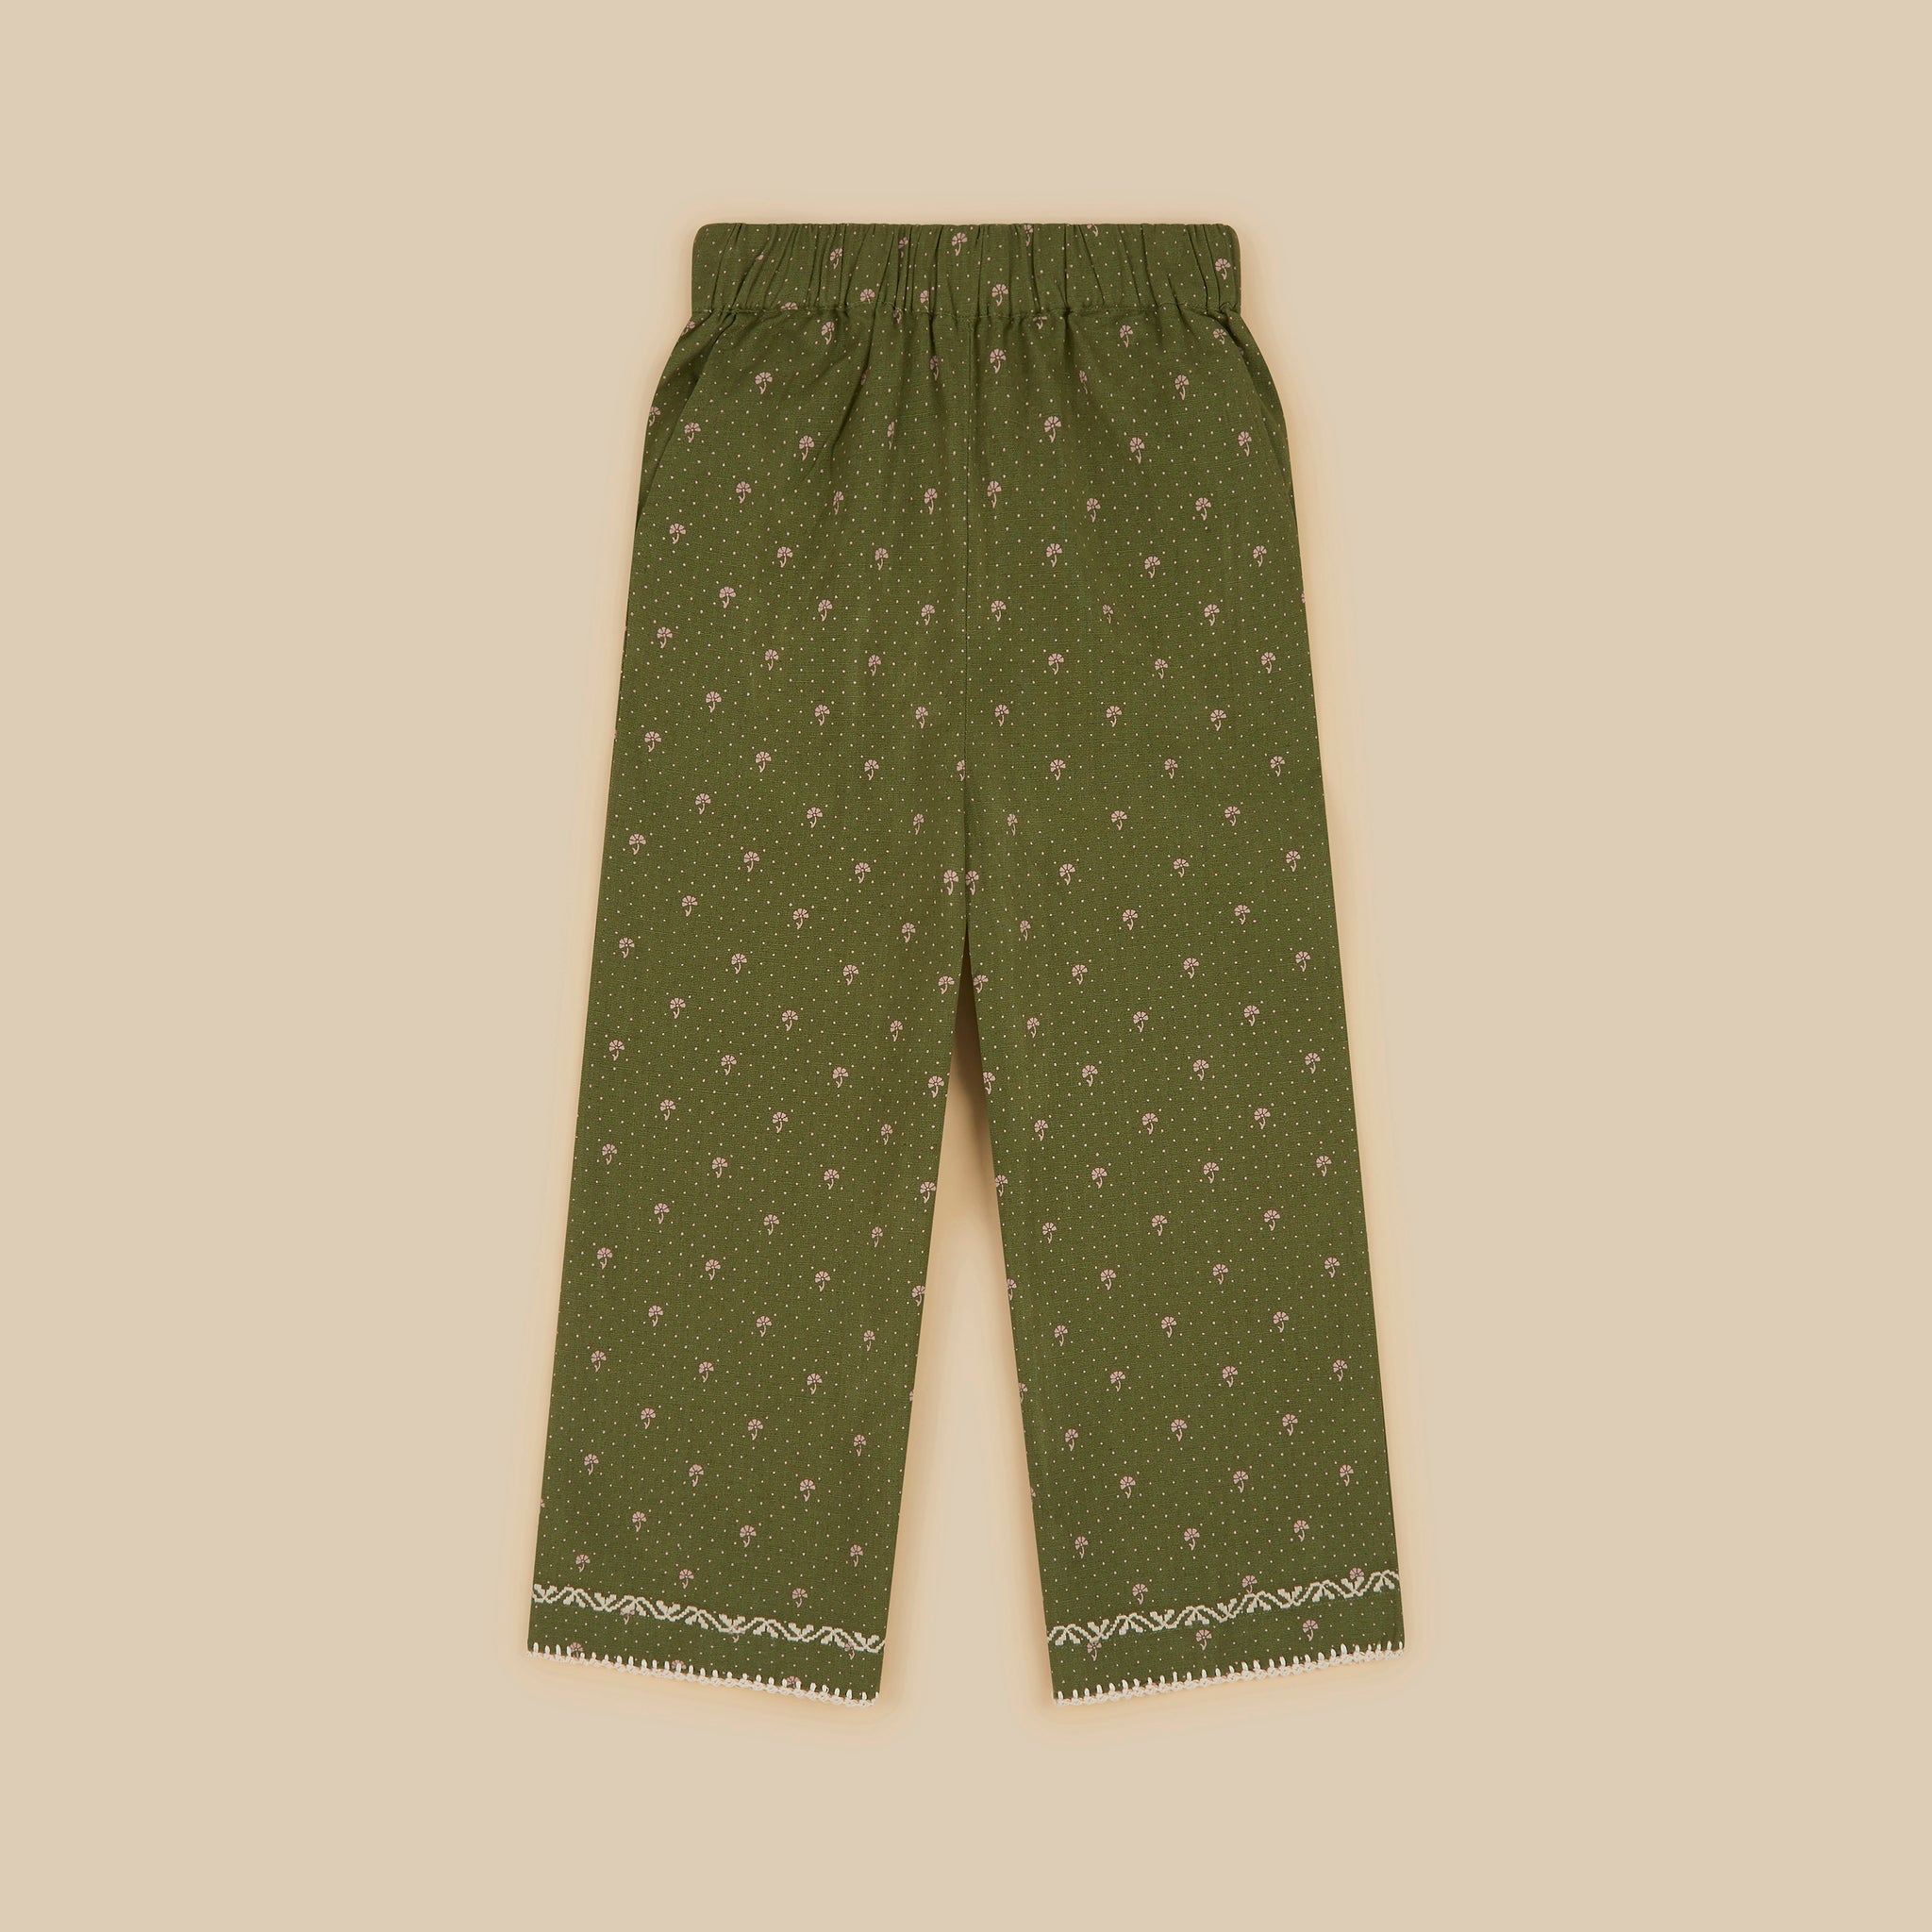 'Milo' Trousers - Valley Calico Fern